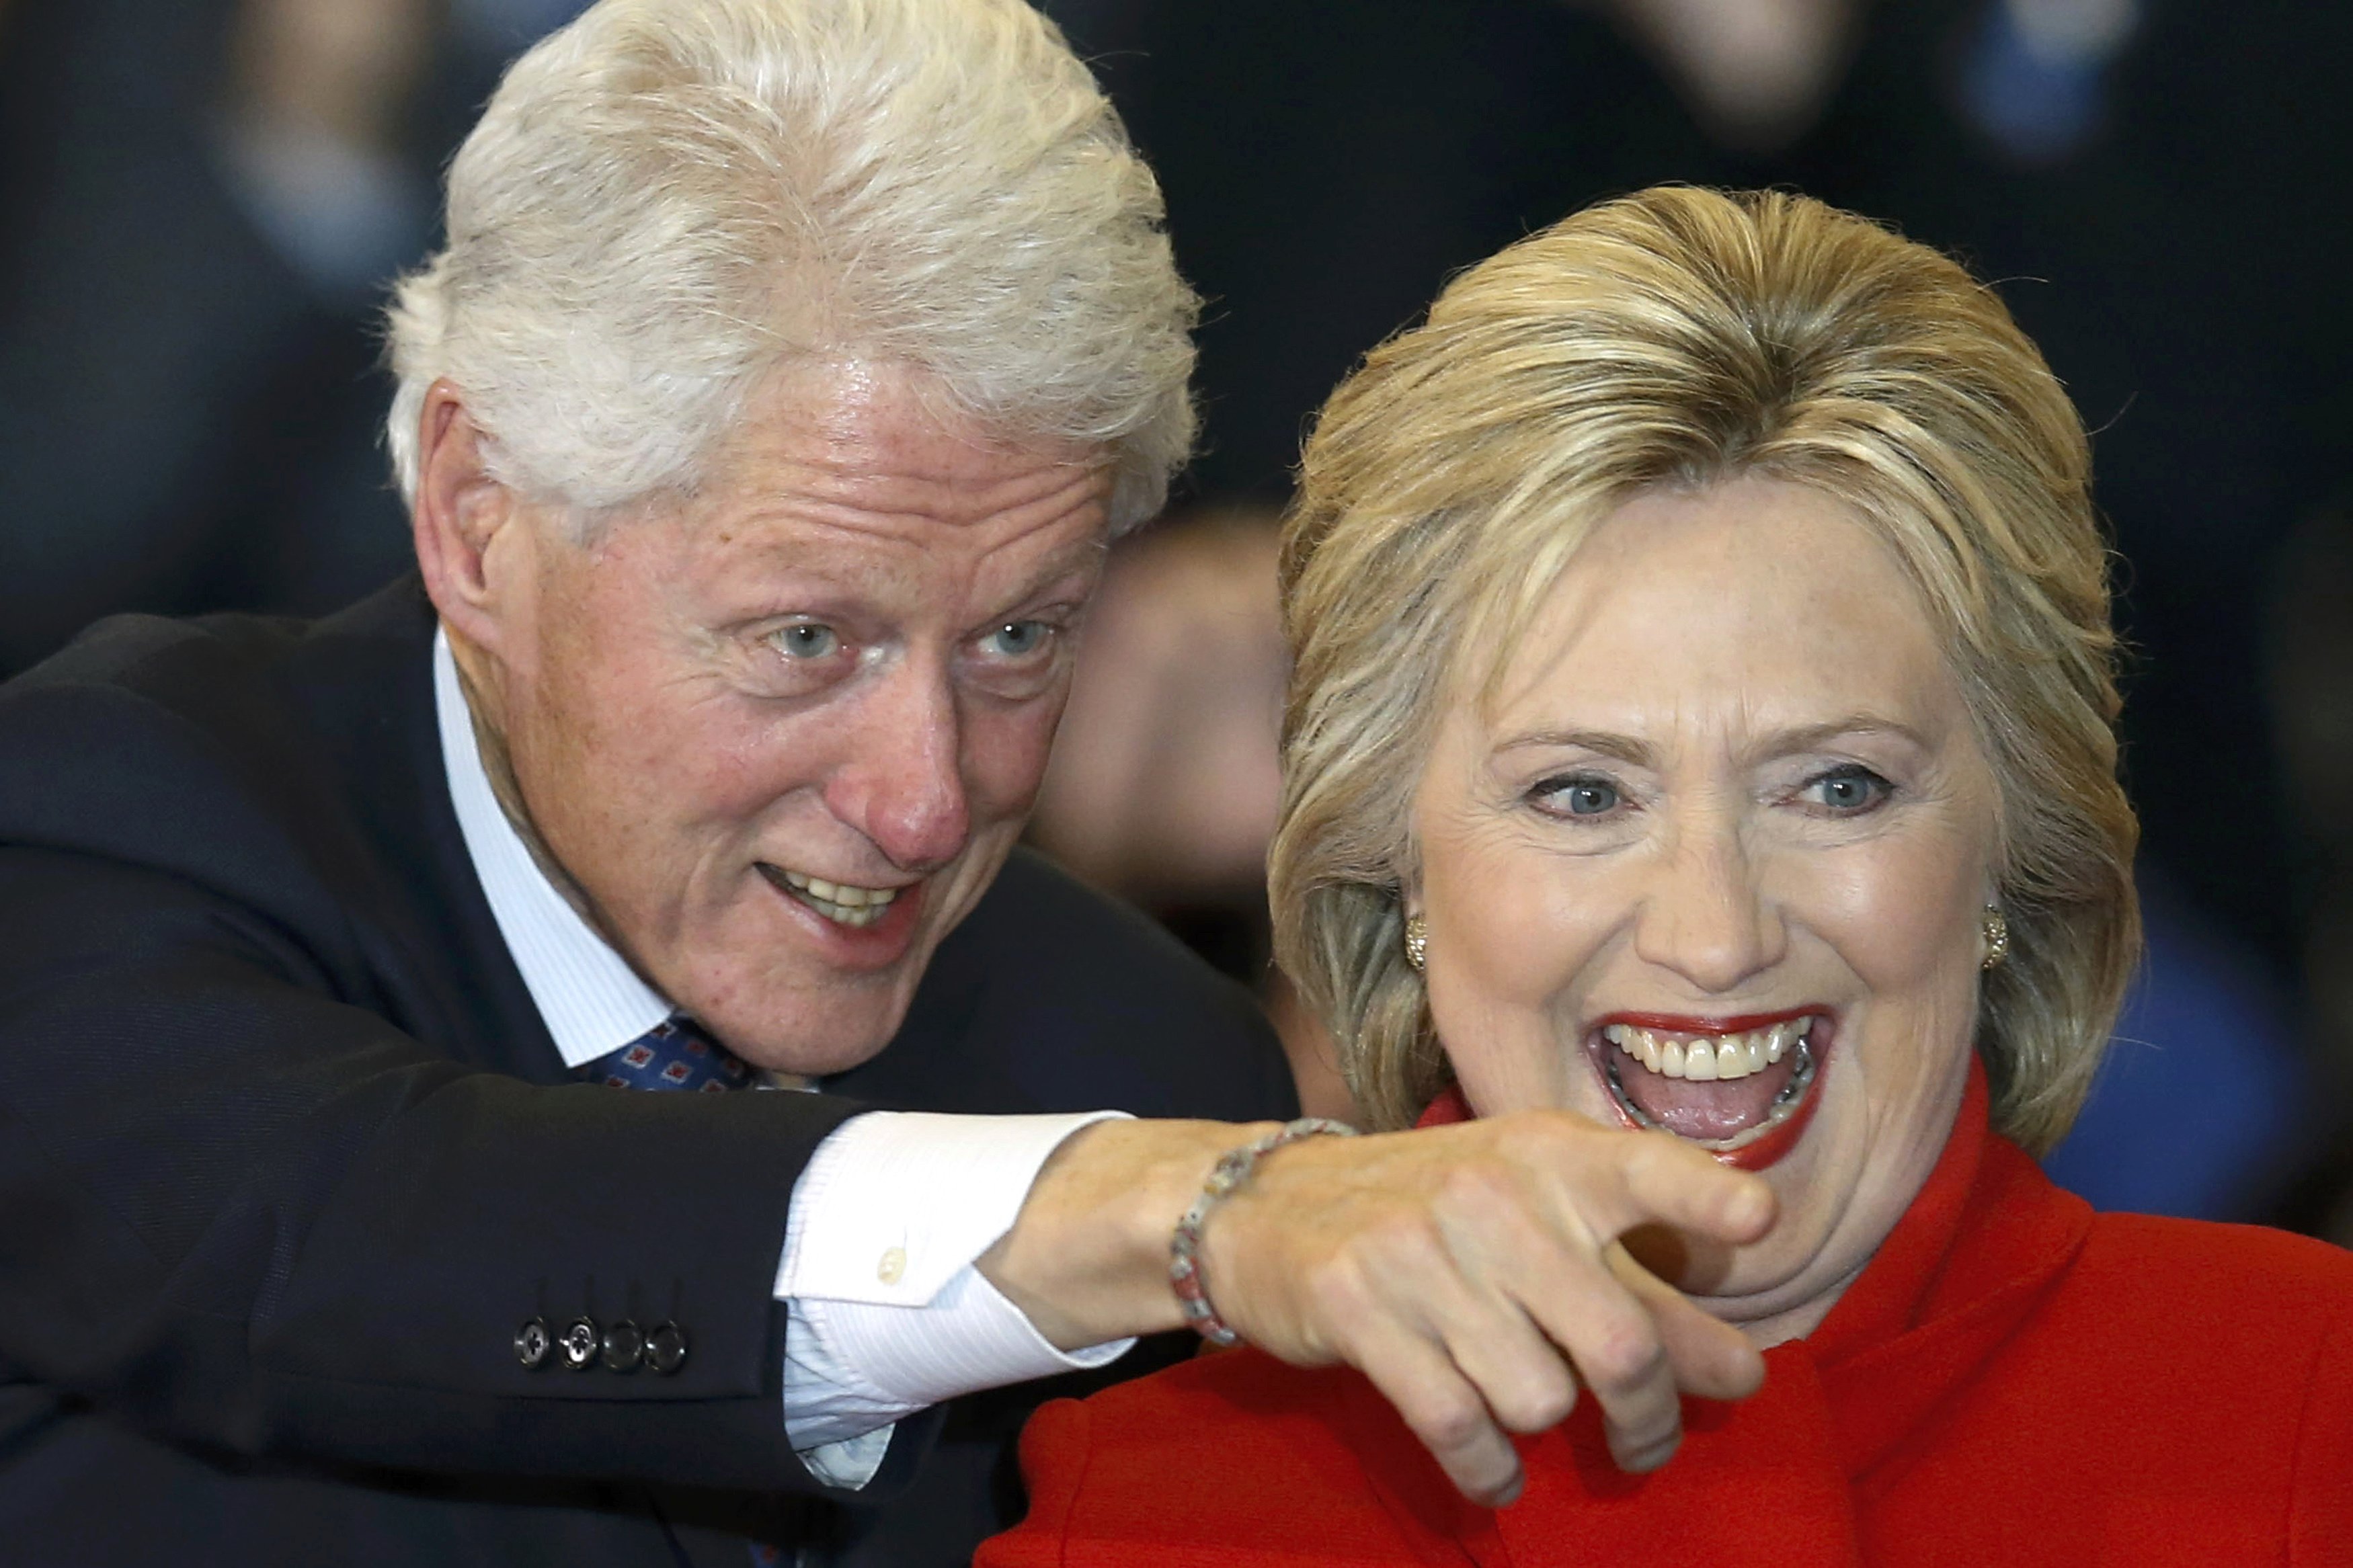 Democratic U.S. presidential candidate Hillary Clinton laughs as she celebrates with her husband, former President Bill Clinton, at a caucus rally in Des Moines, Iowa, on Monday. | REUTERS